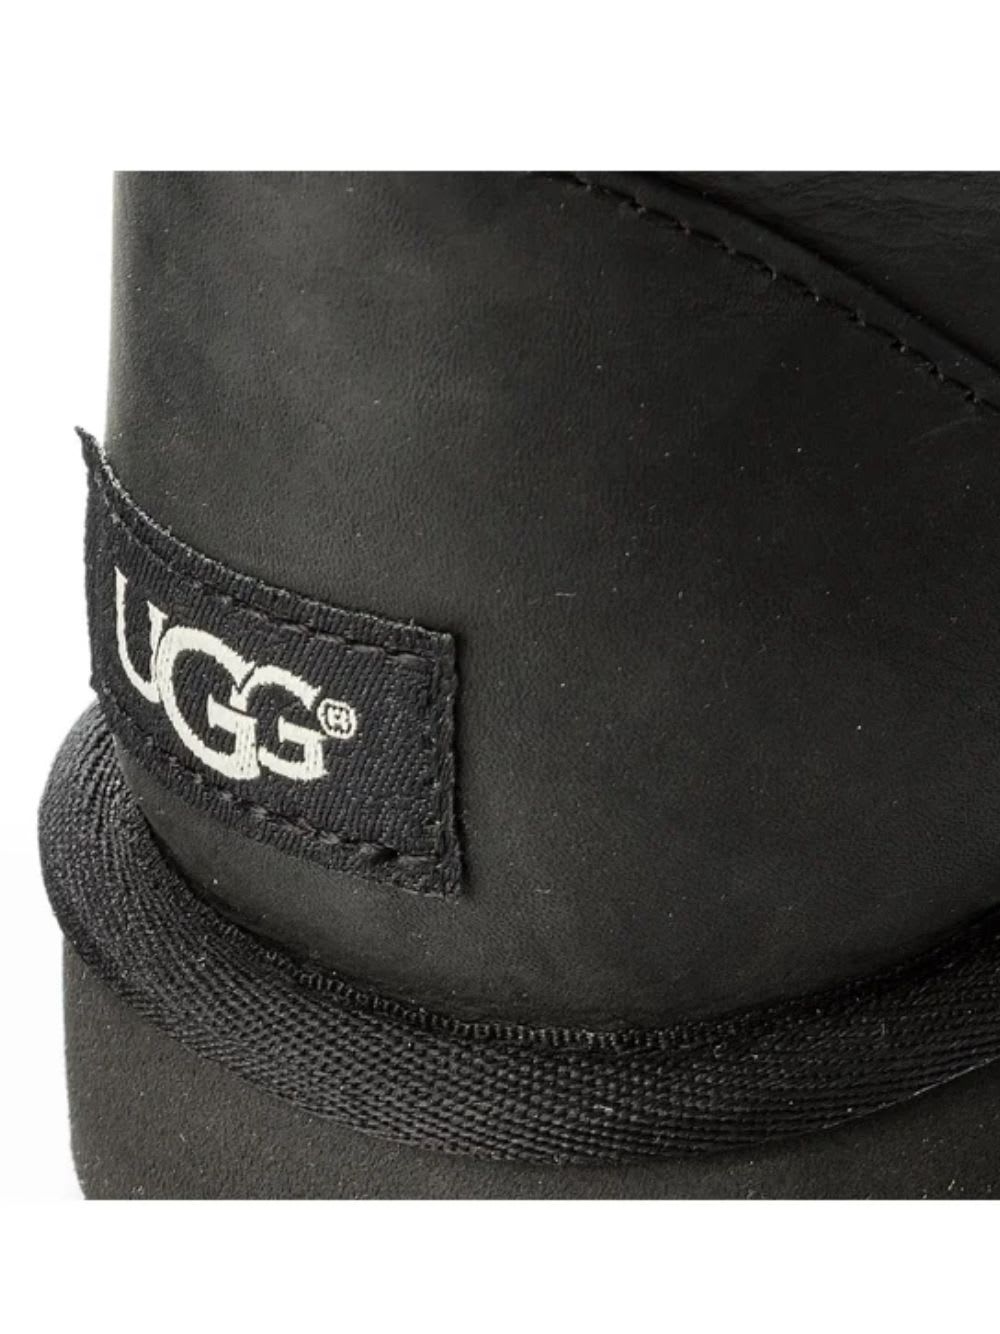 Shop Ugg W Classic Short Leather Shoes In Blk Black